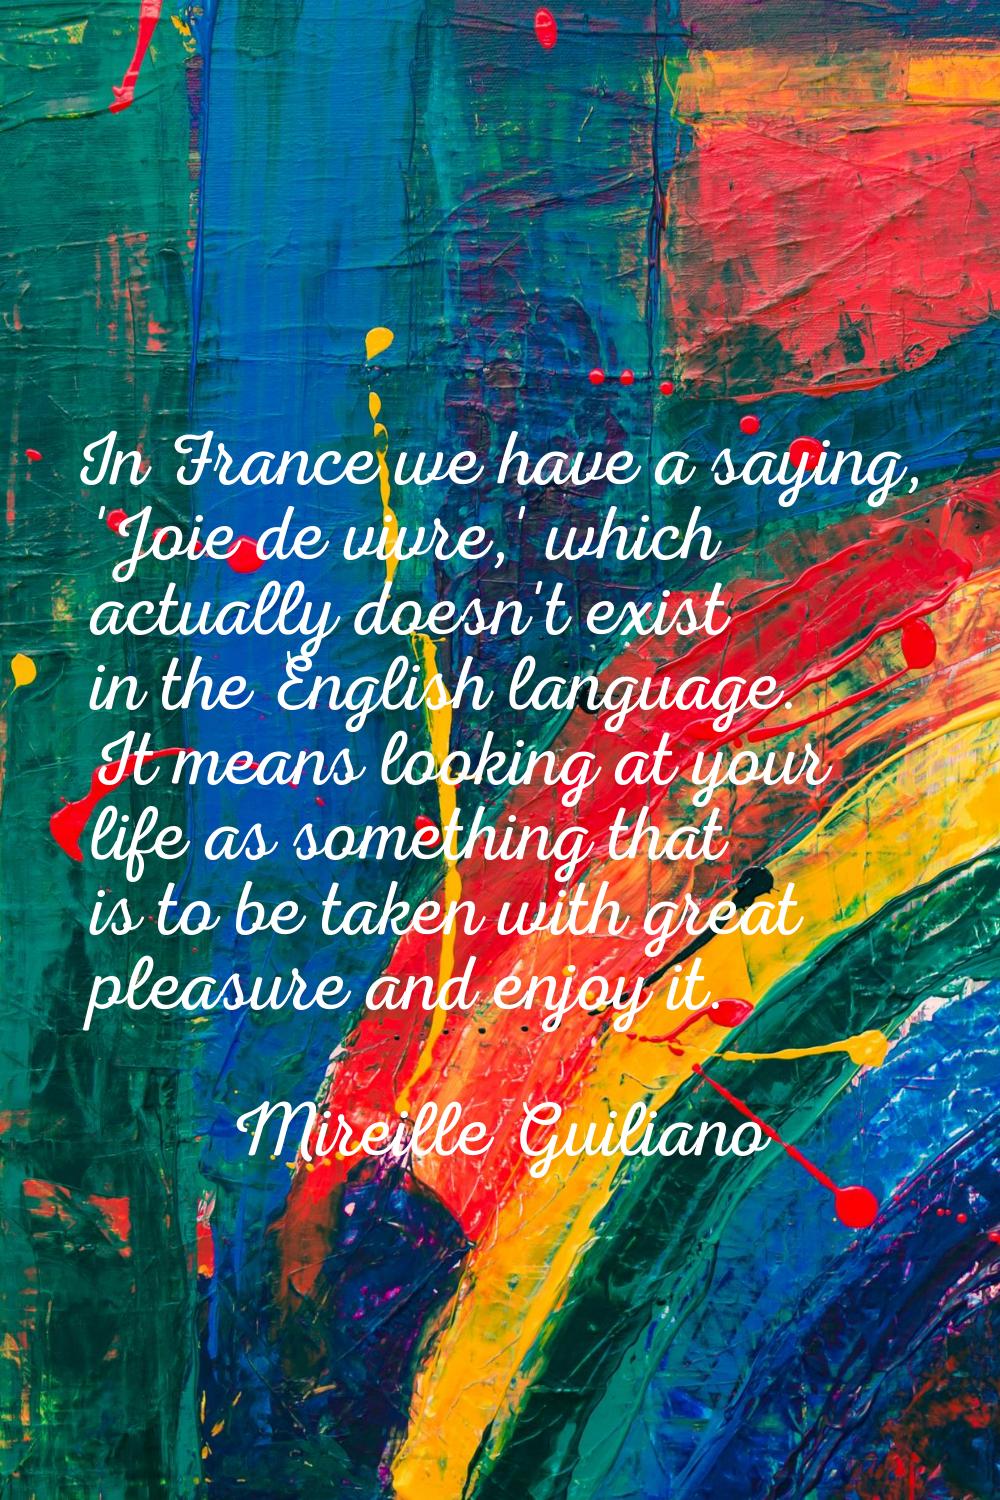 In France we have a saying, 'Joie de vivre,' which actually doesn't exist in the English language. 